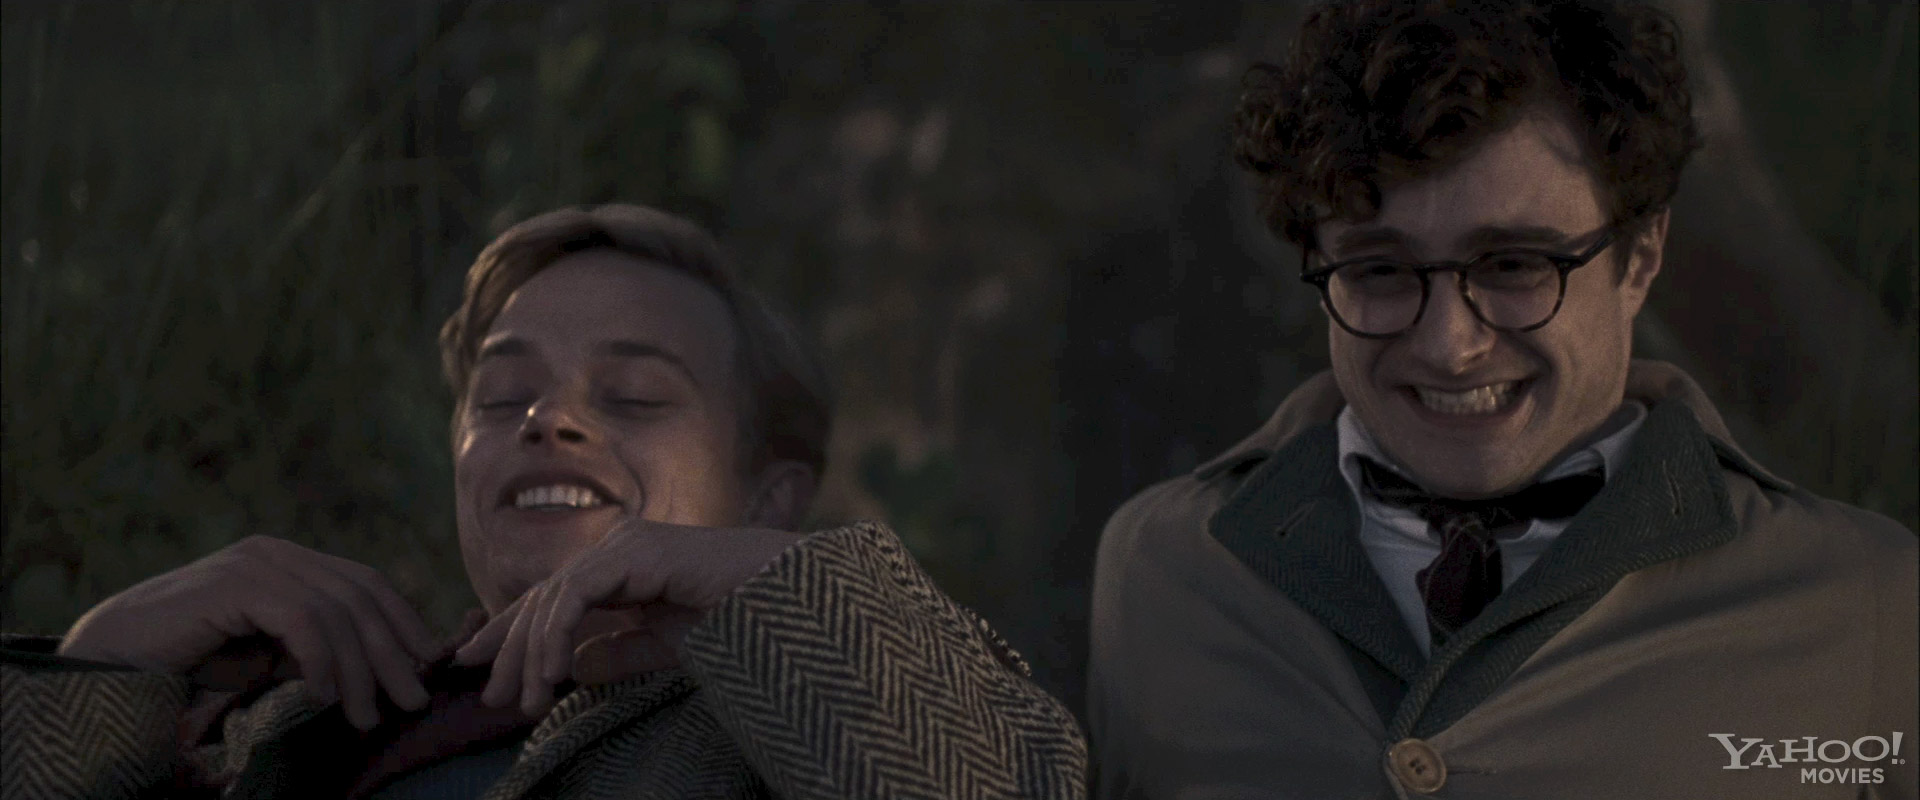 trailer-for-kill-your-darlings-with-daniel-radcliffe-01.jpg